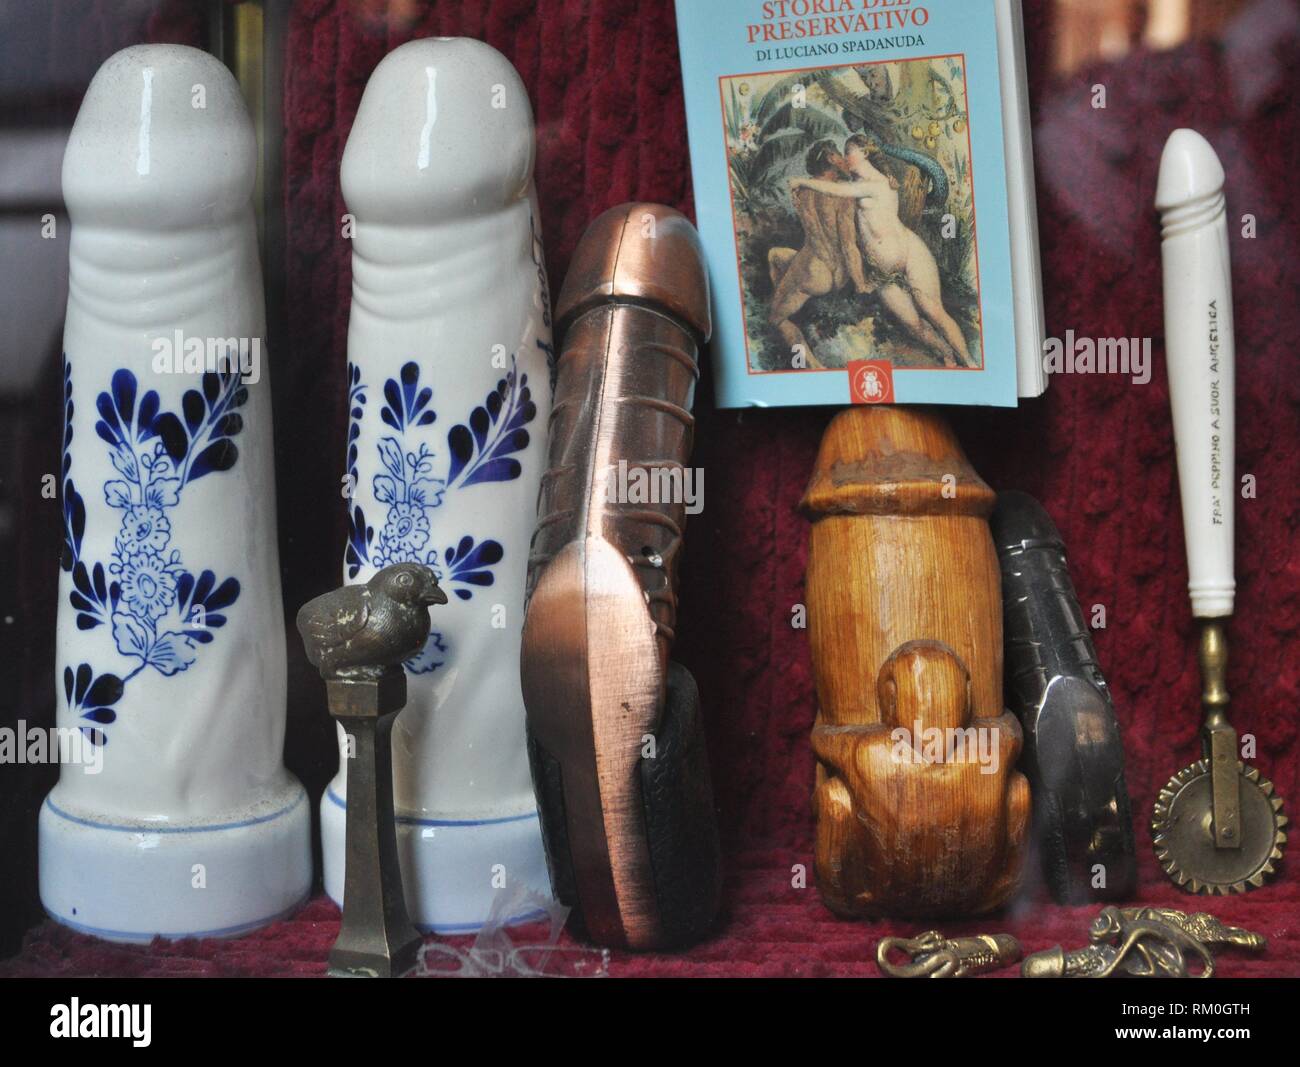 Turin, Italy: vintage dildos from the window of an antique shop specialized in old erotic goods Stock Photo